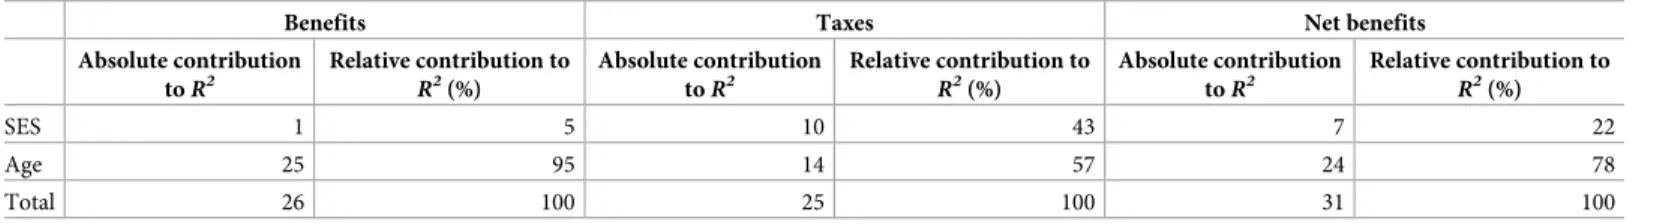 Table 2. Contribution to the explained variance by age and SES for benefits, taxes, and net benefits (Shapley-value decomposition of the R 2 ).